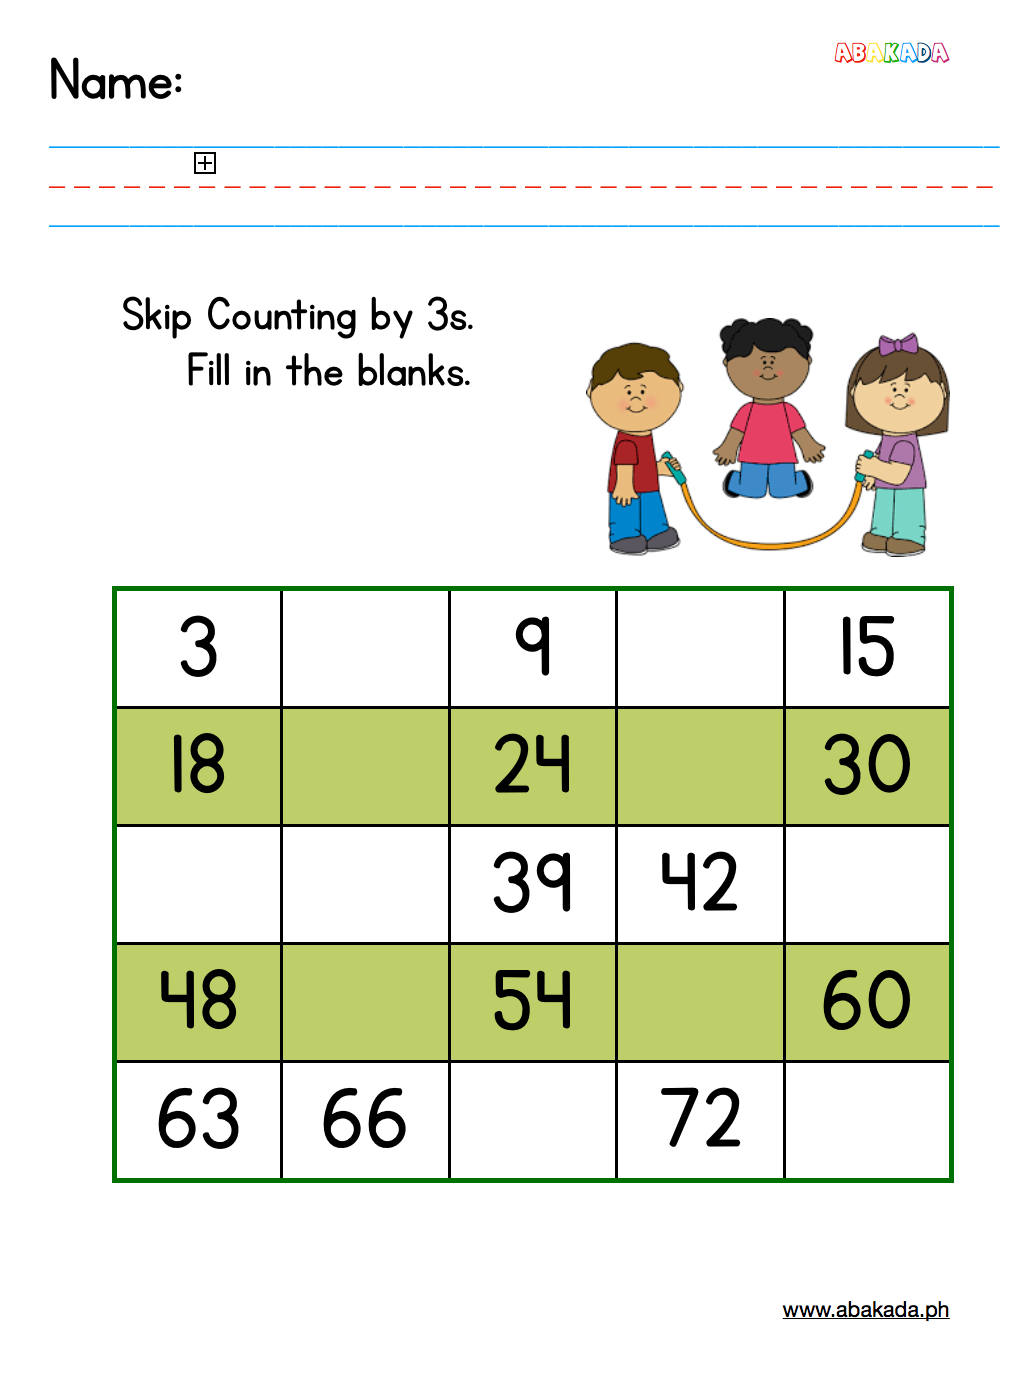 skip-counting-3s-worksheets-countingworksheets